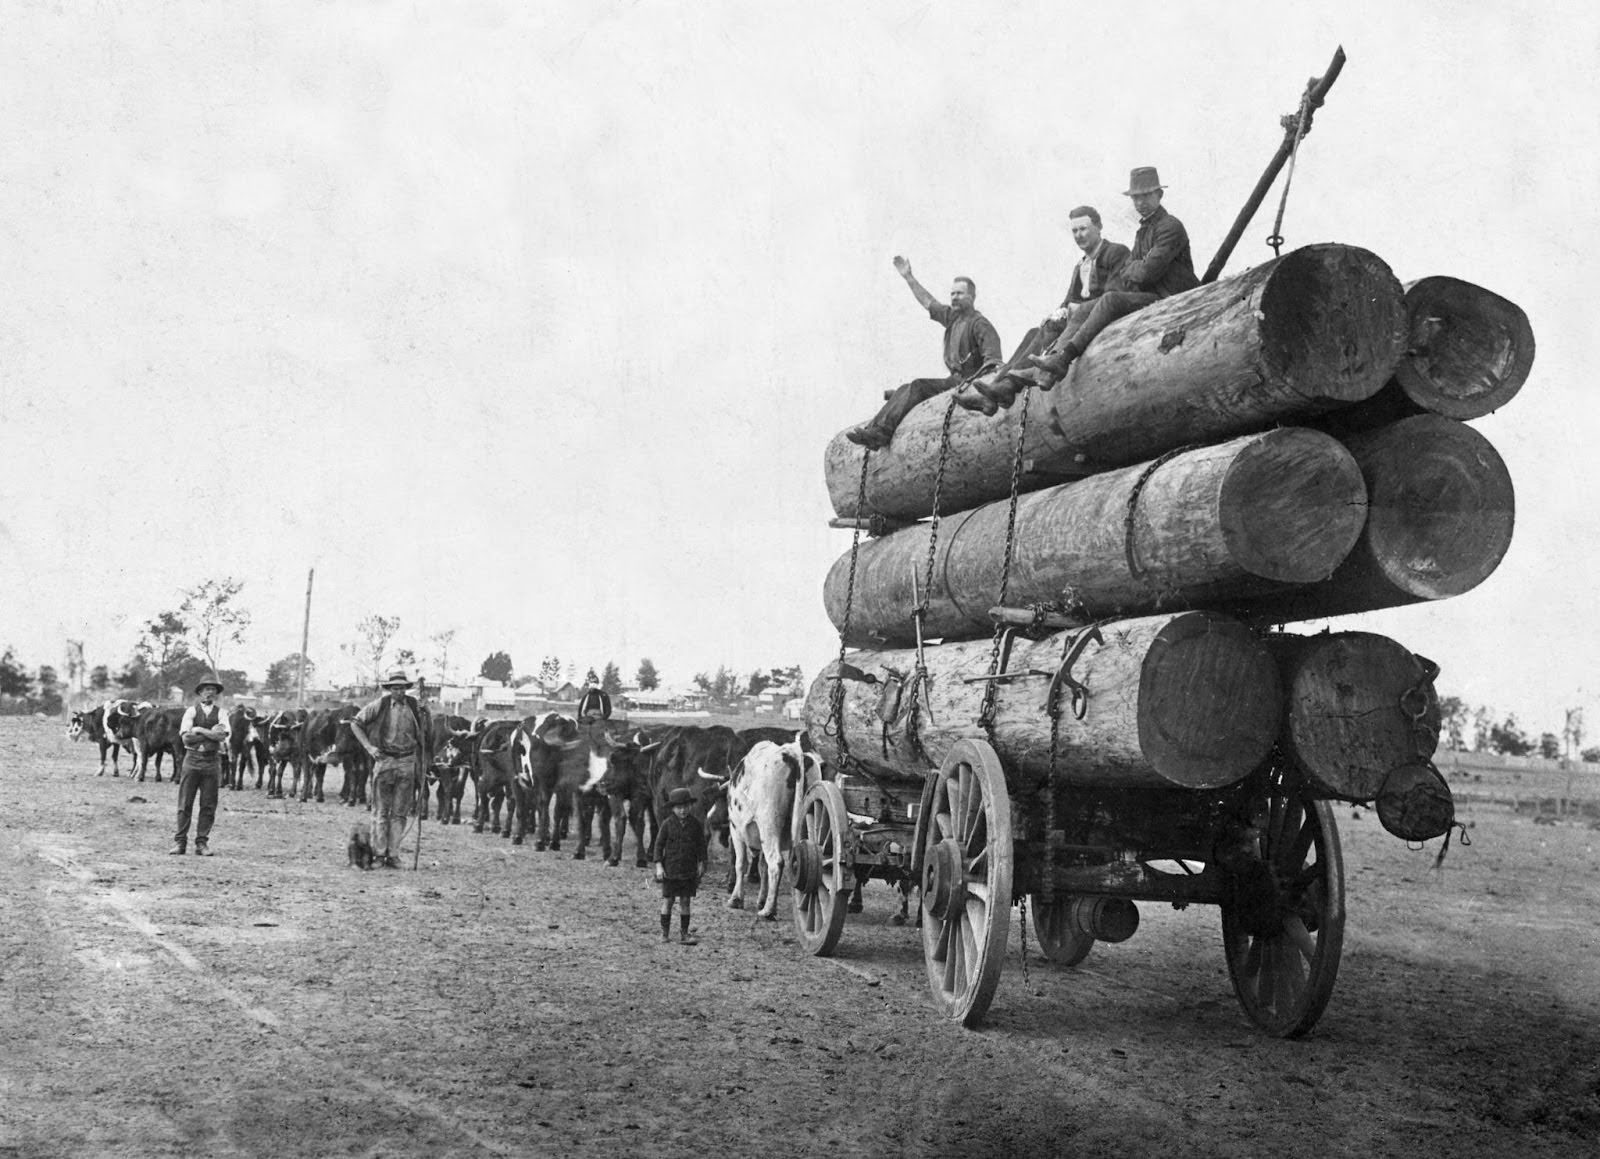 Black and White Image of historic foresters, horse and carriage carrying timber